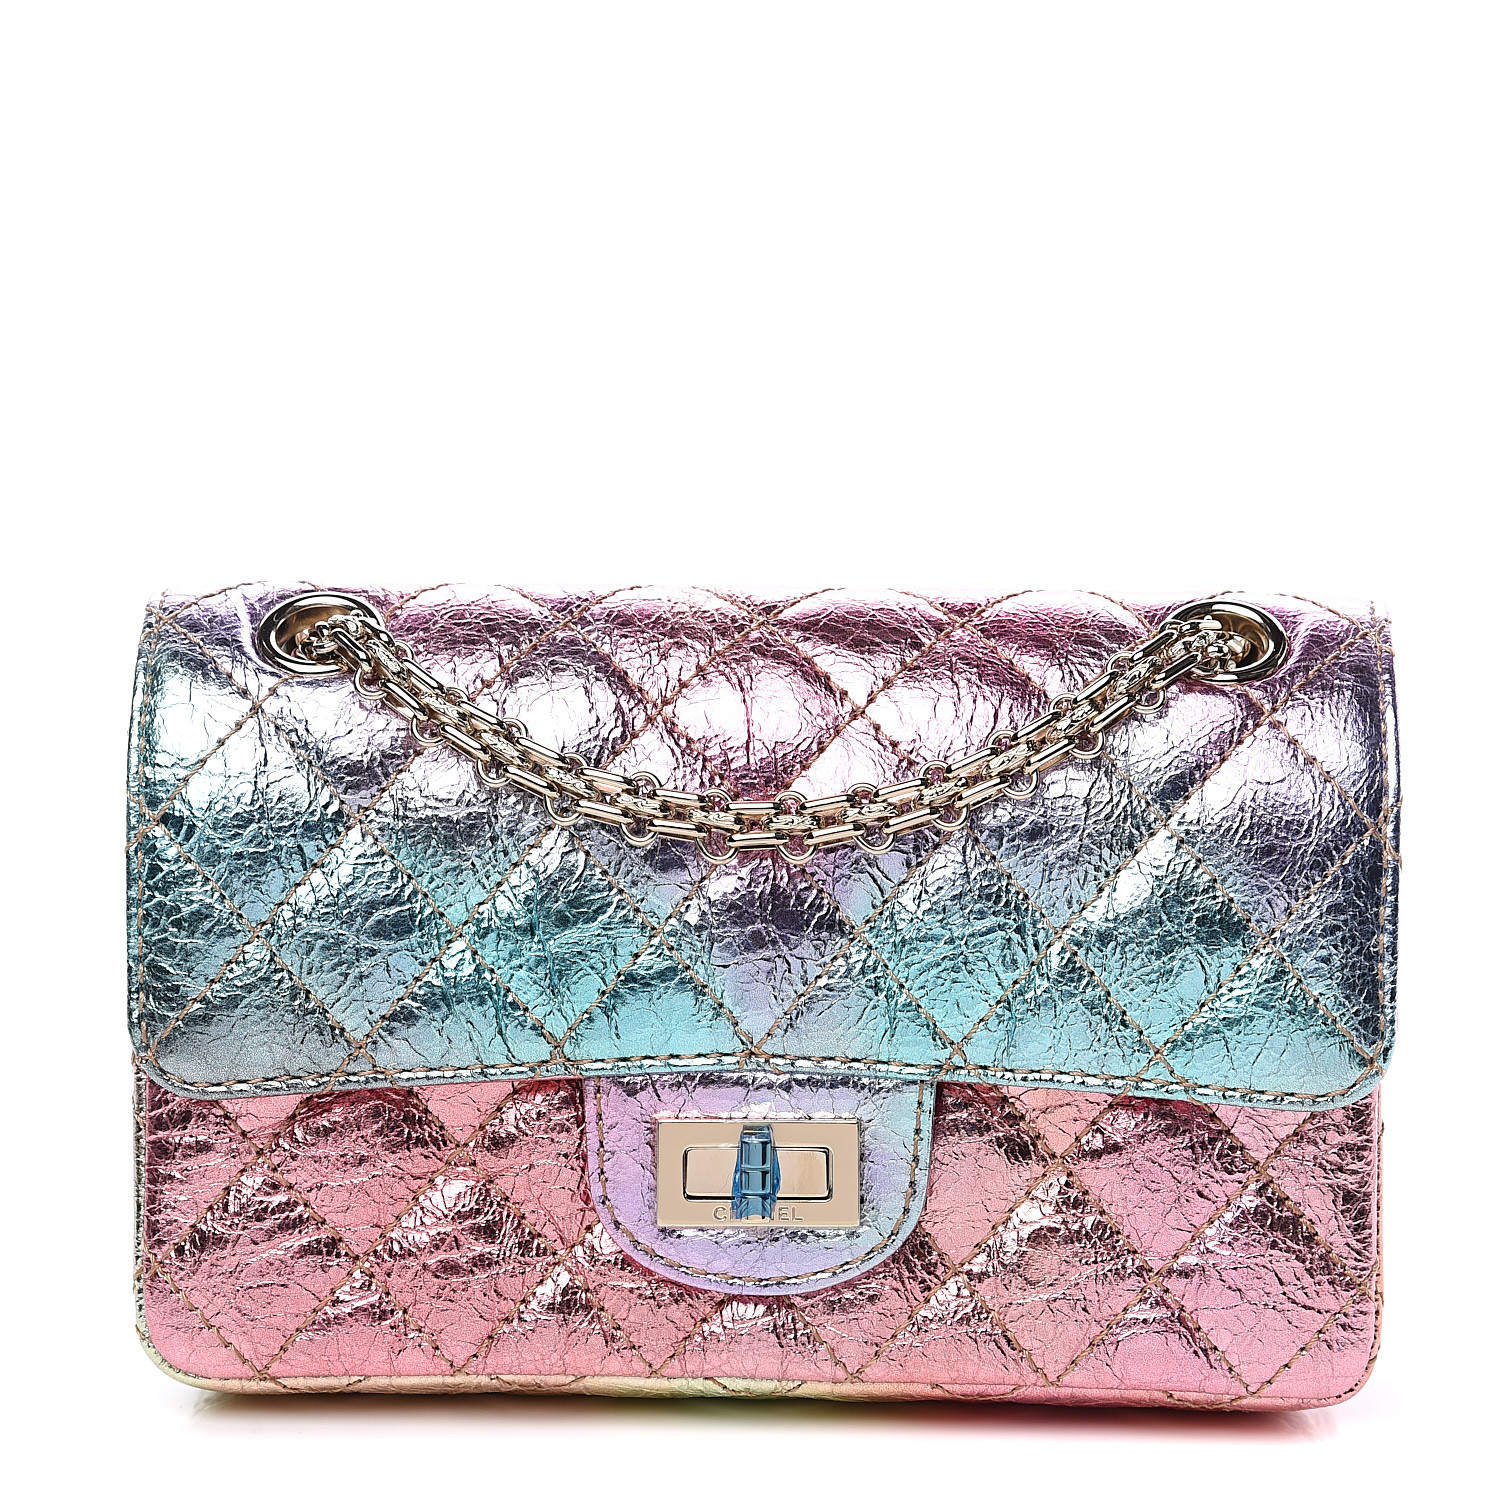 CHANEL Metallic Goatskin Quilted Mini 2.55 Reissue Flap Multicolor 557727